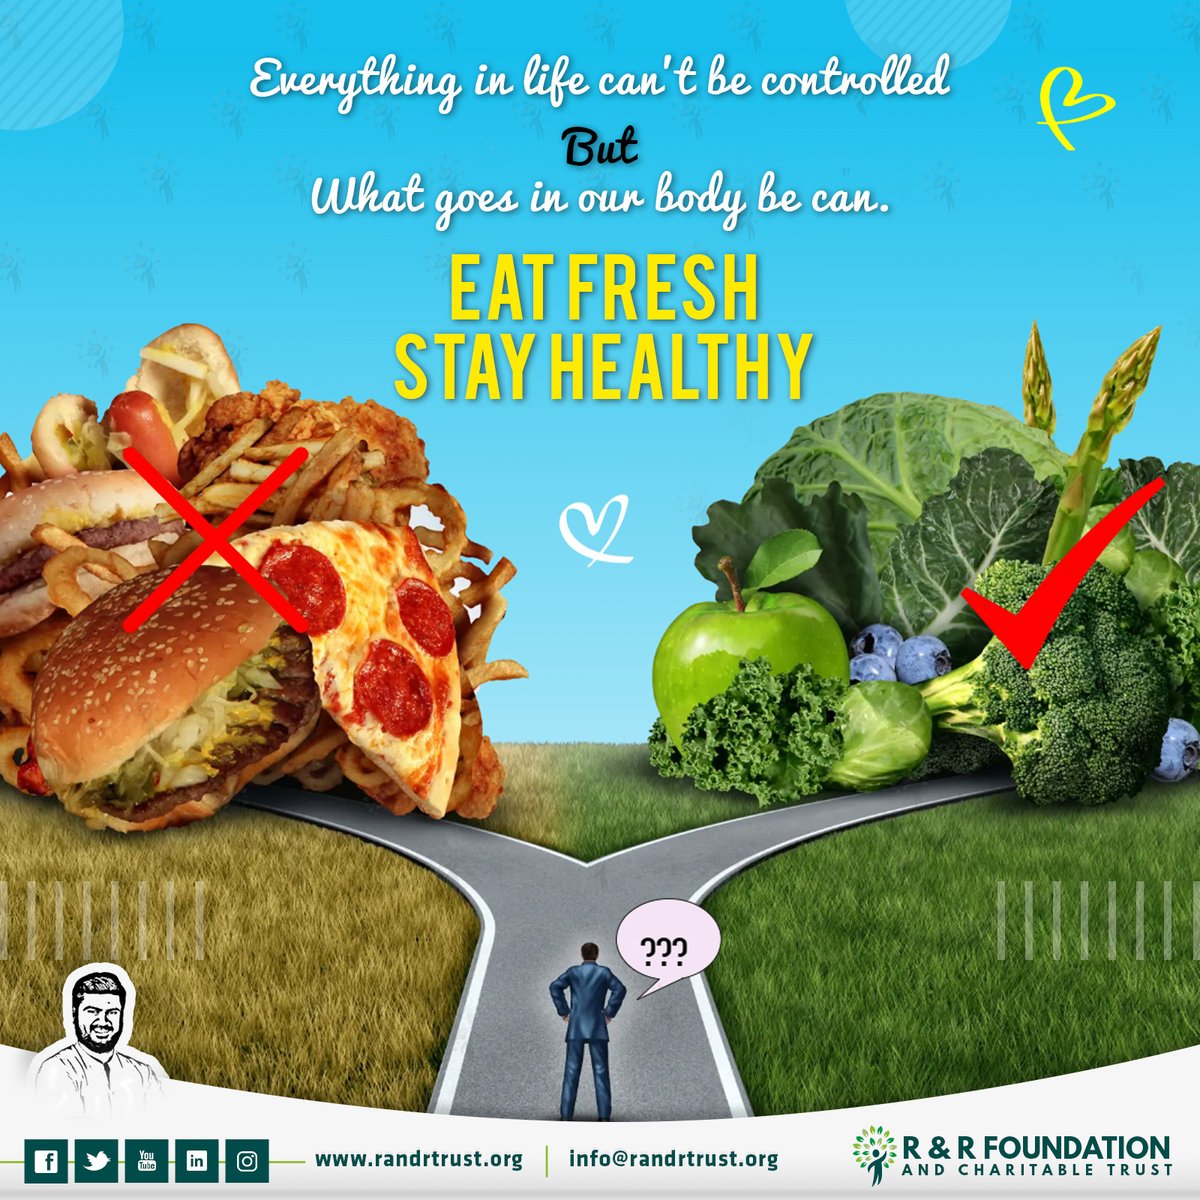 Eat Healthy, Stay Happy !!
Better health requires a healthy diet, so make sure you are eating the right food.😊
#RRFoundationTrust #EatHealthyStayHappy #EatFreshStayHealthy🤗🏋‍♀😋 #FreshEat #EatHealthyBeHappy💚